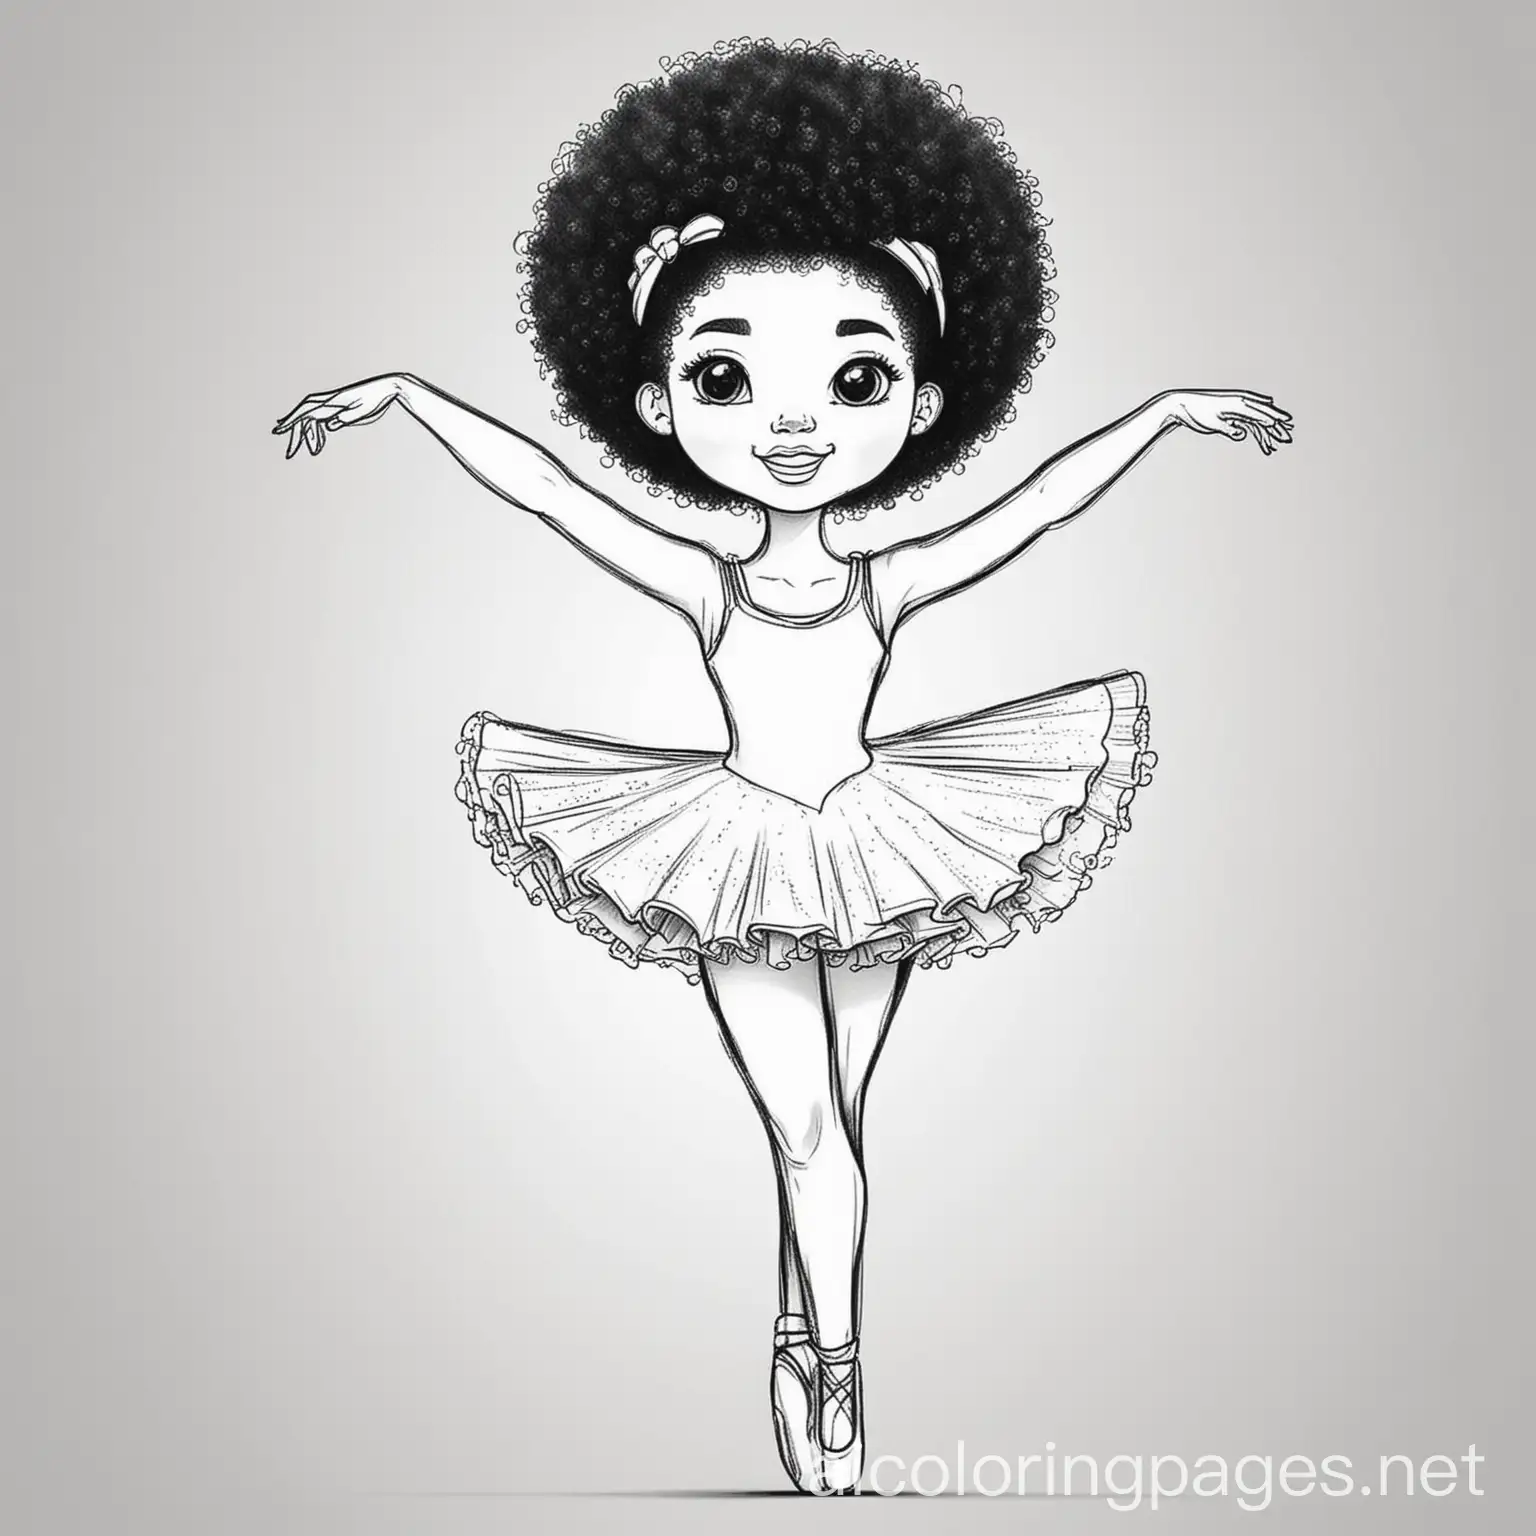 ballerina with an afro dancing
, Coloring Page, black and white, line art, white background, Simplicity, Ample White Space. The background of the coloring page is plain white to make it easy for young children to color within the lines. The outlines of all the subjects are easy to distinguish, making it simple for kids to color without too much difficulty